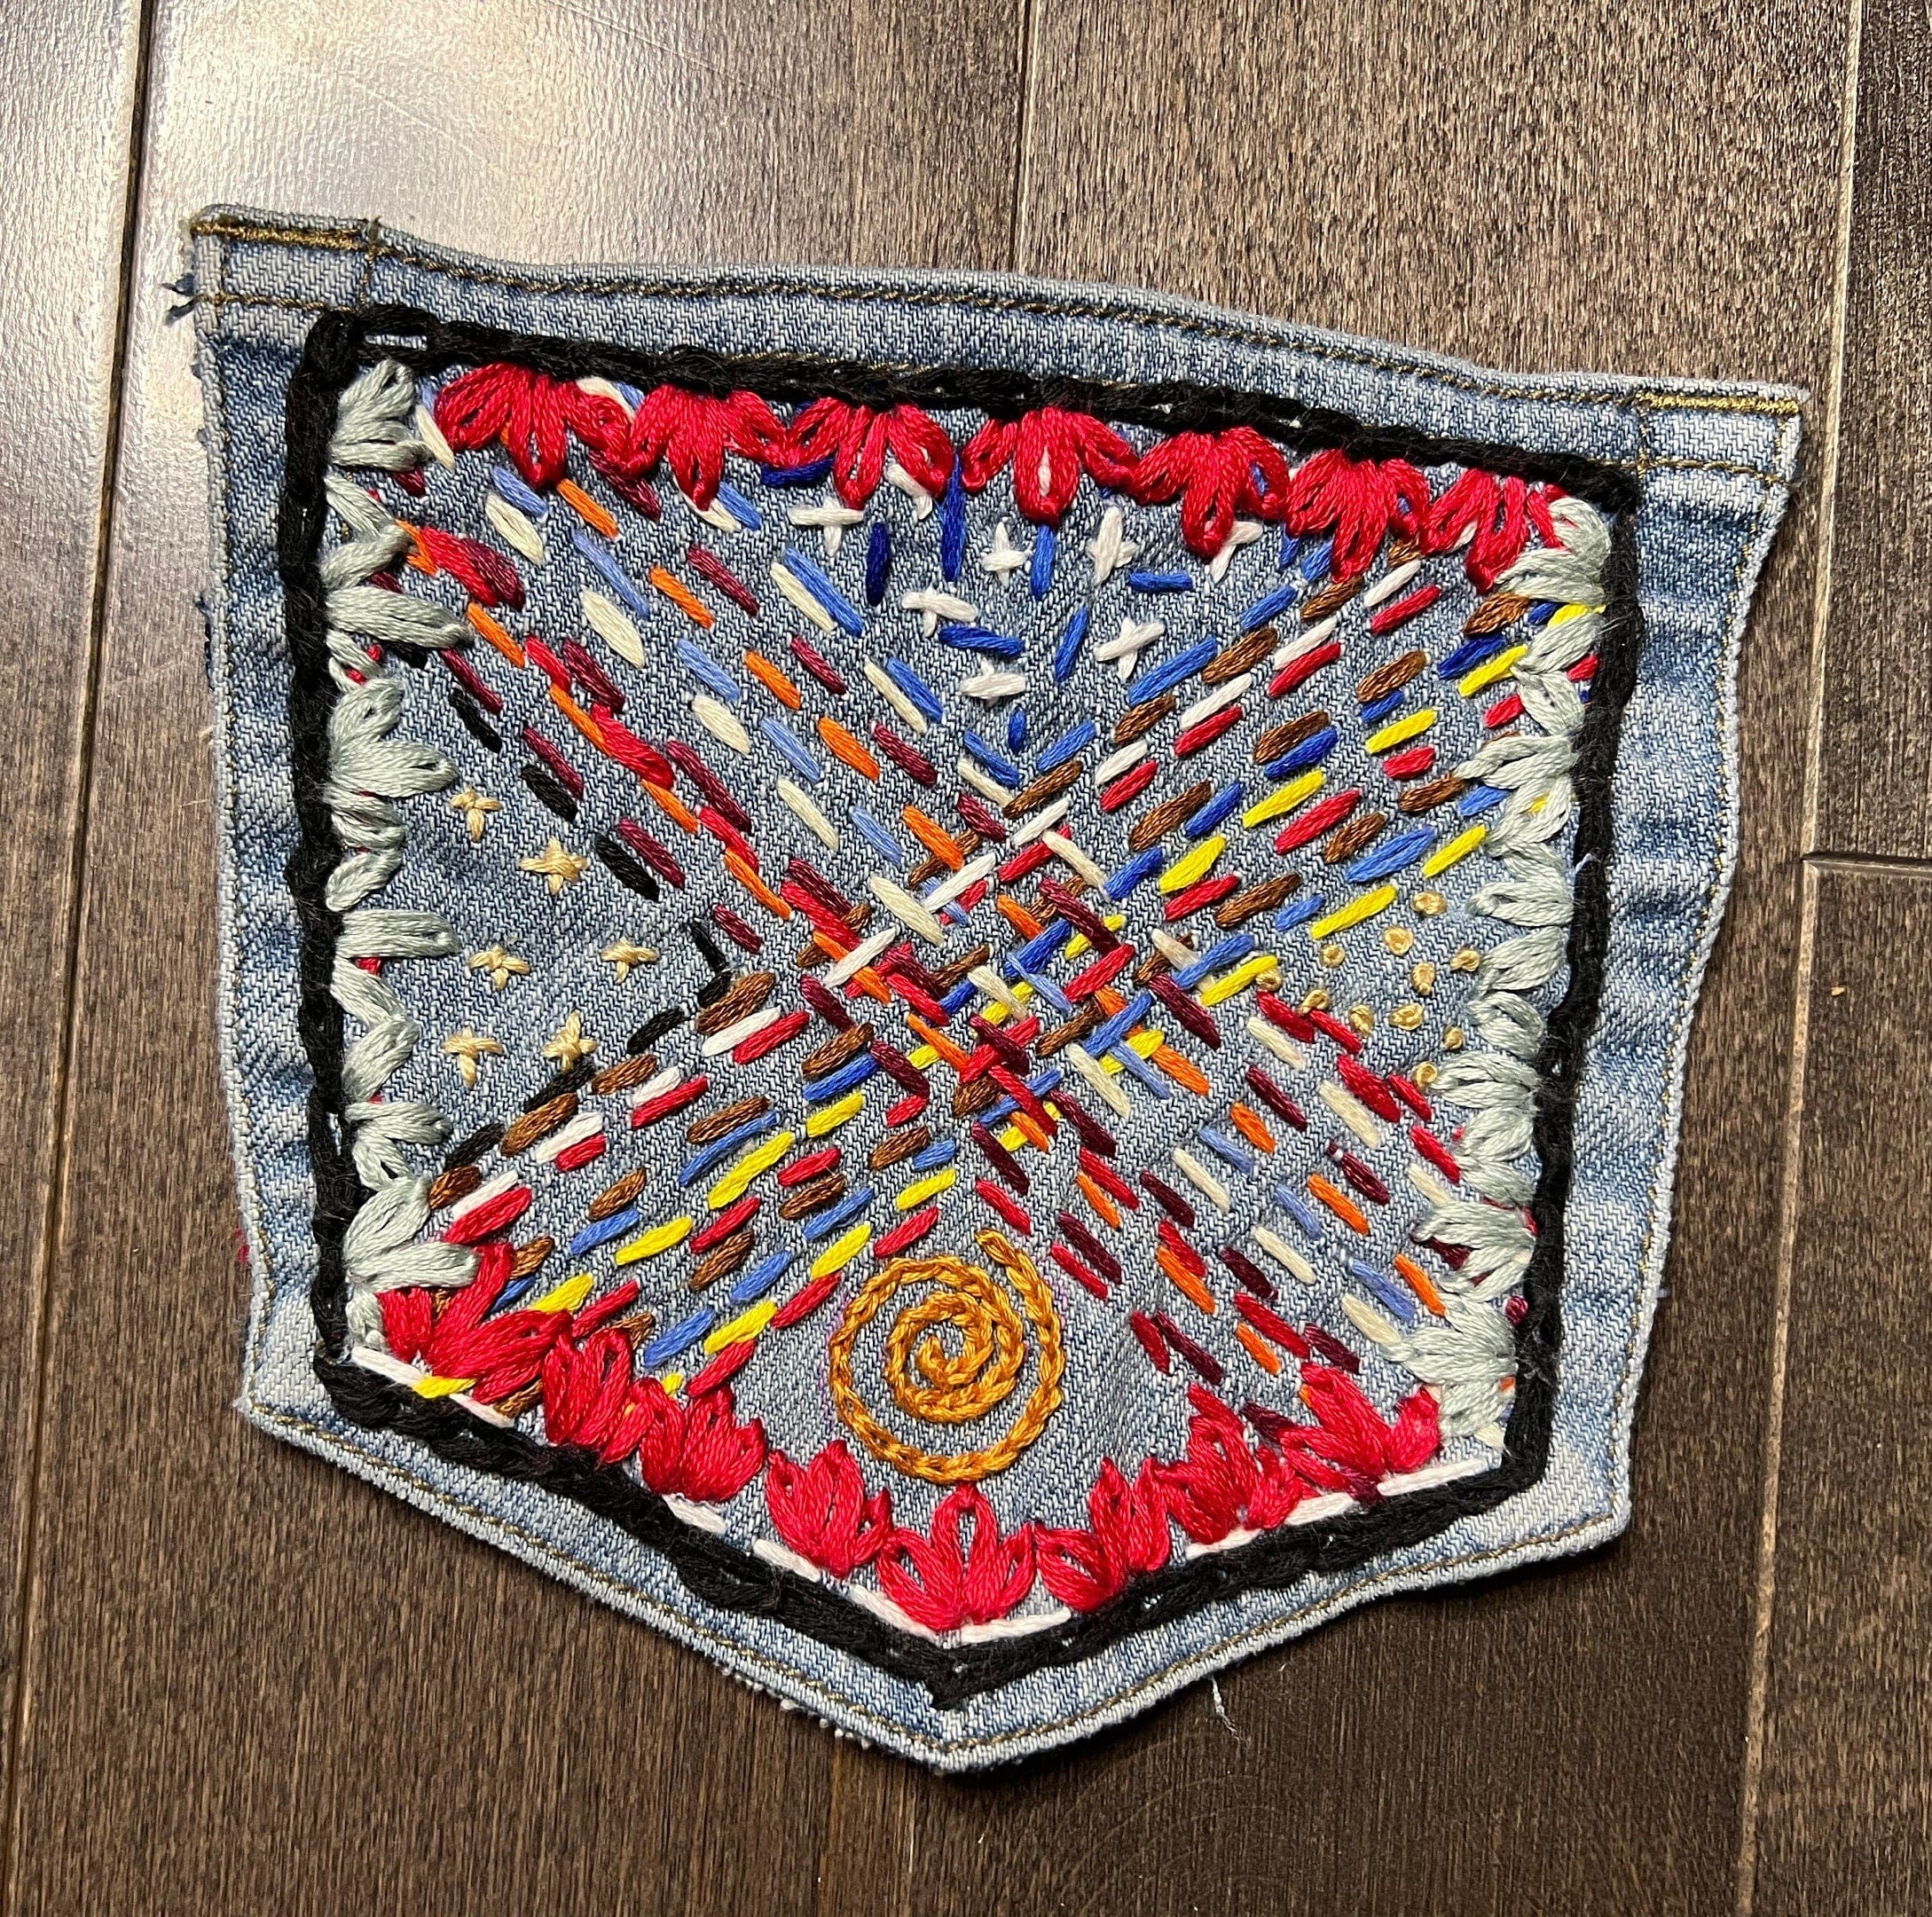 Hand Stitched Abstract HOT POCKET - OOAK embroidered denim pocket patch 5 X 5.5 unique creation Appliques & Patches